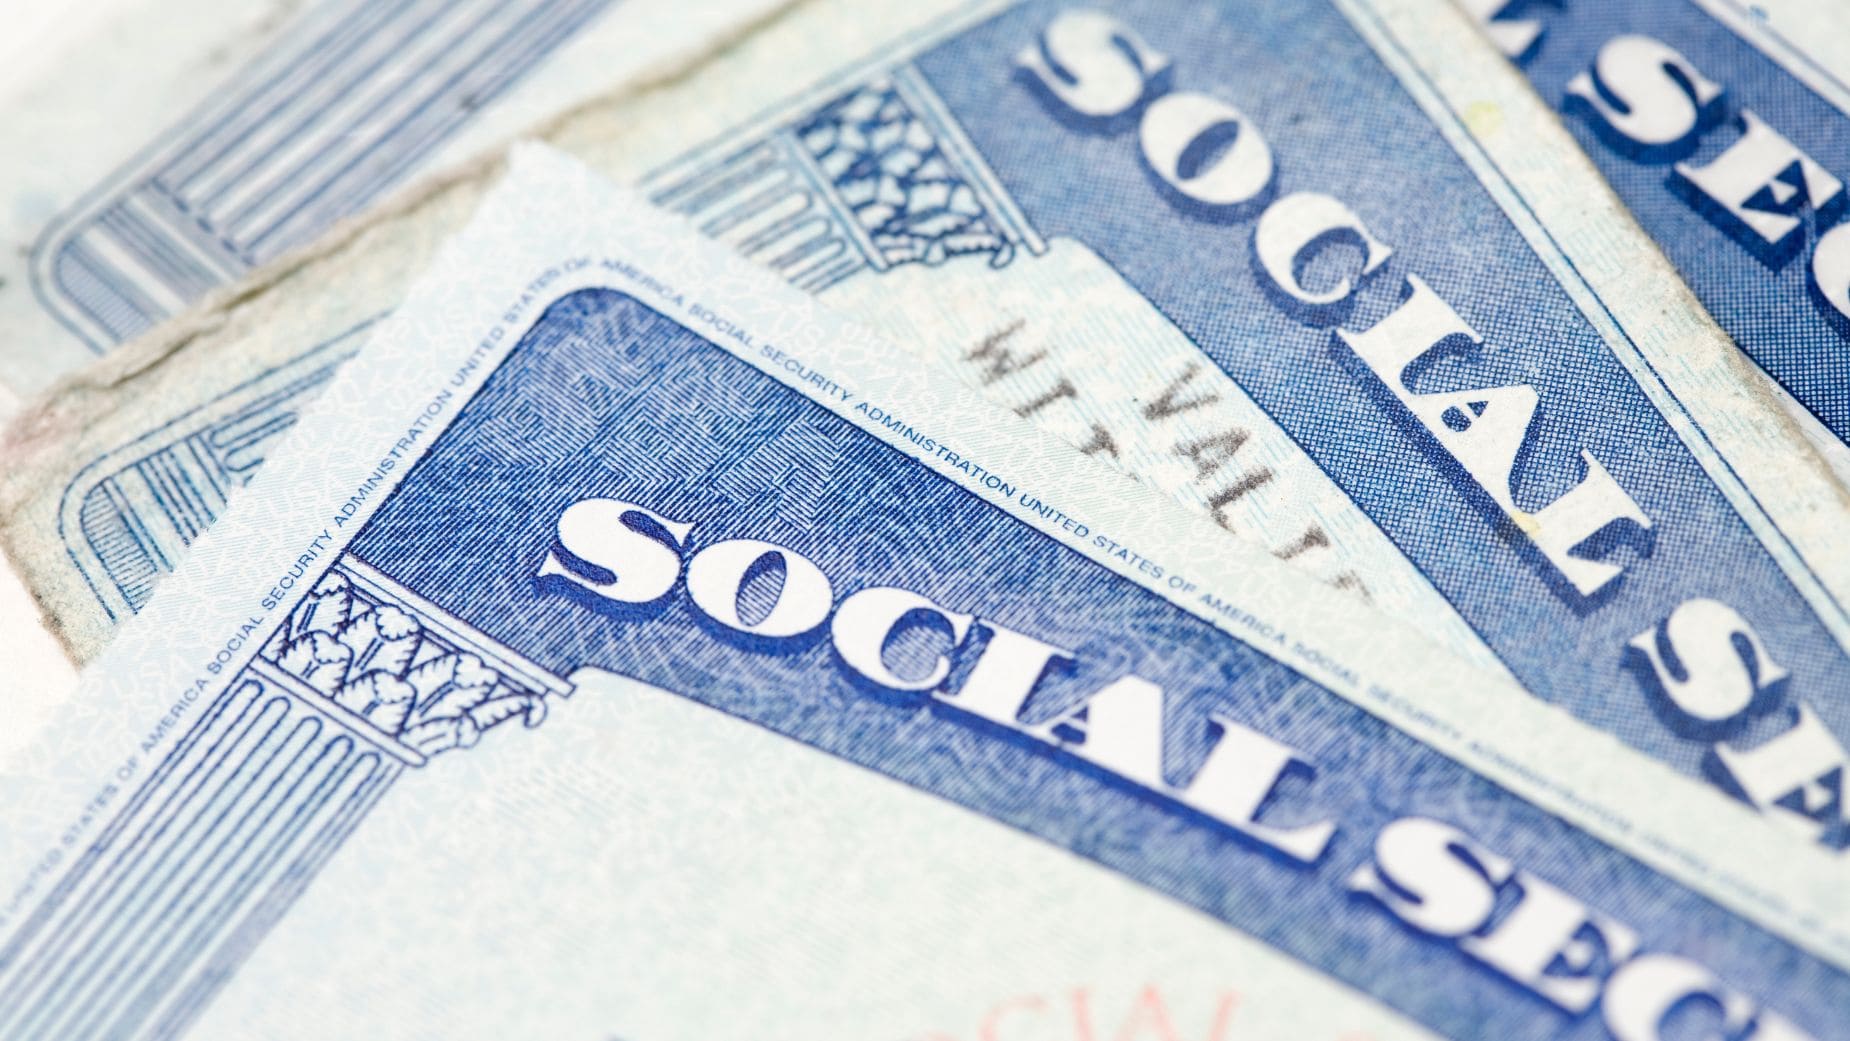 Social Security is sending a new payment to some retirees